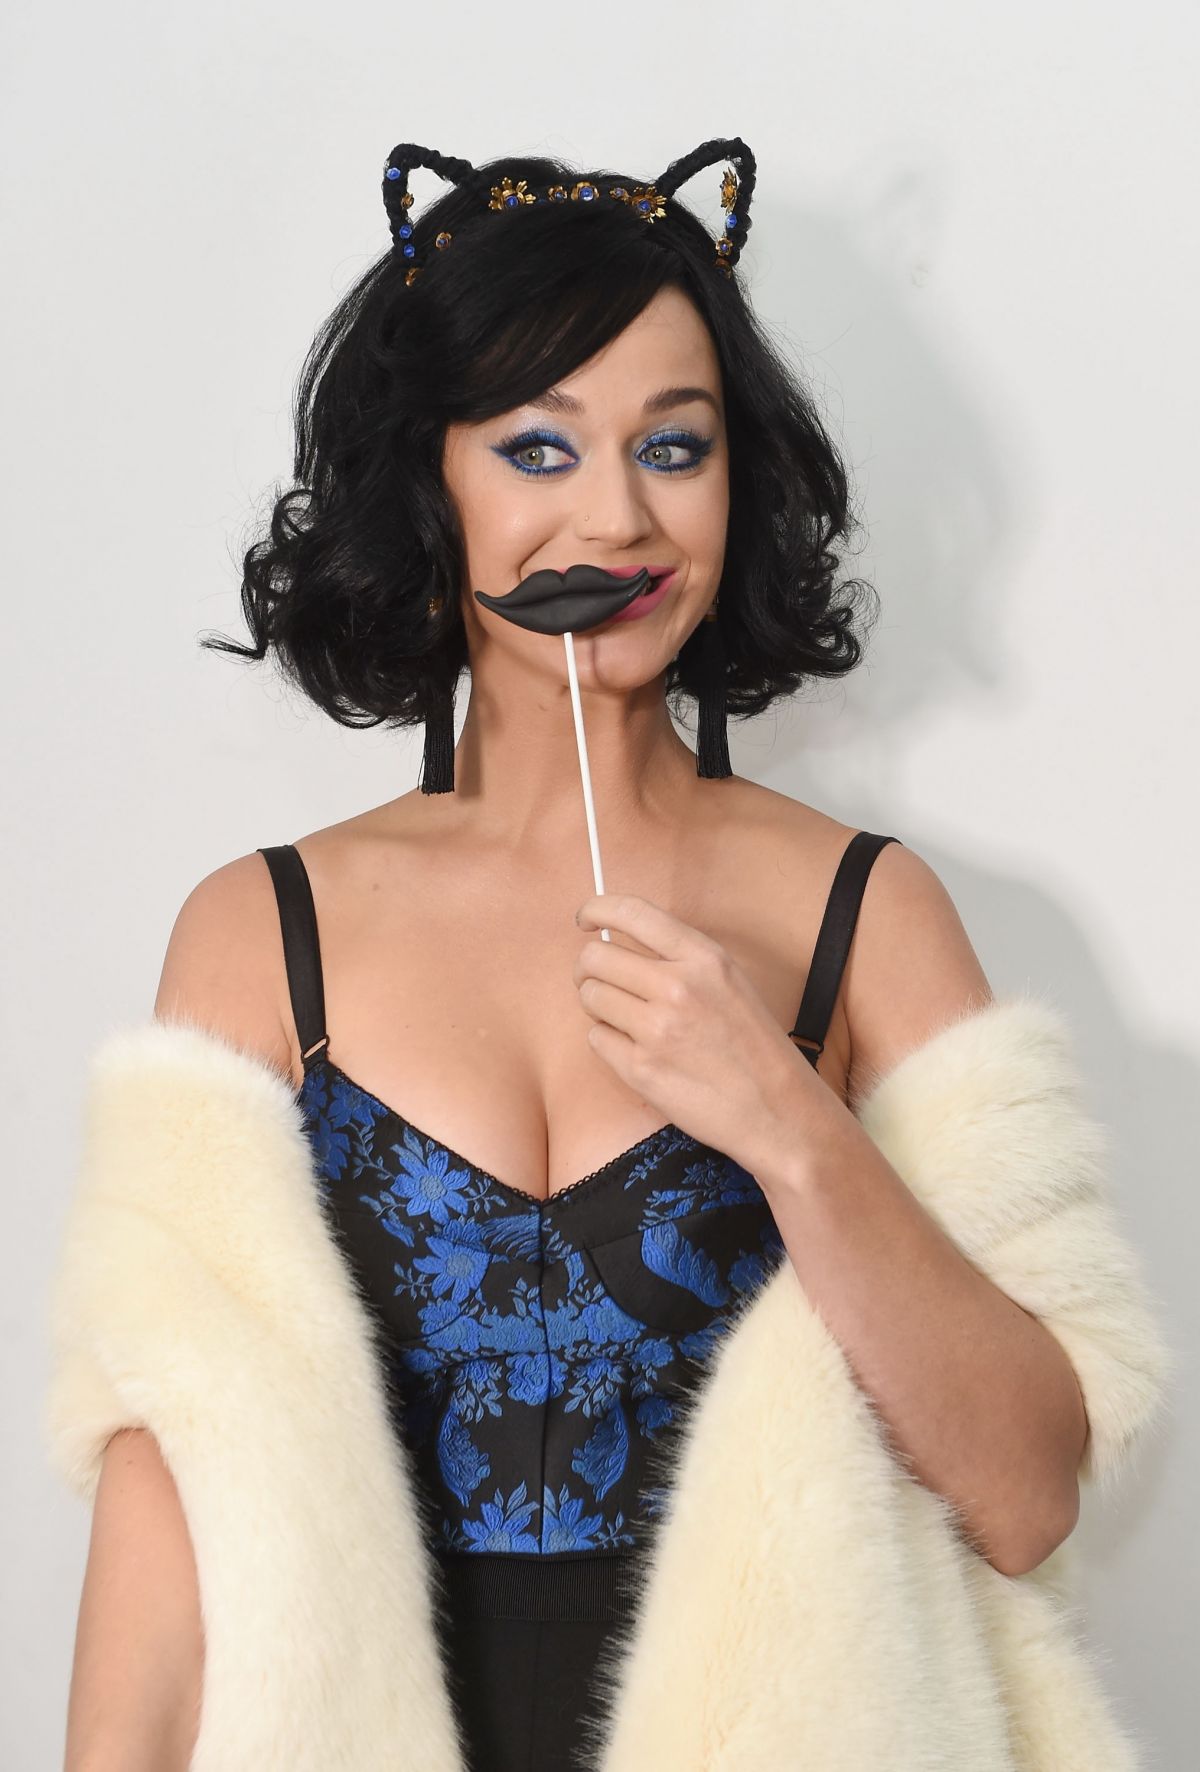 katy-perry-at-covergirl-katy-kat-matte-launch-in-new-york-05-01-2016_8.jpg